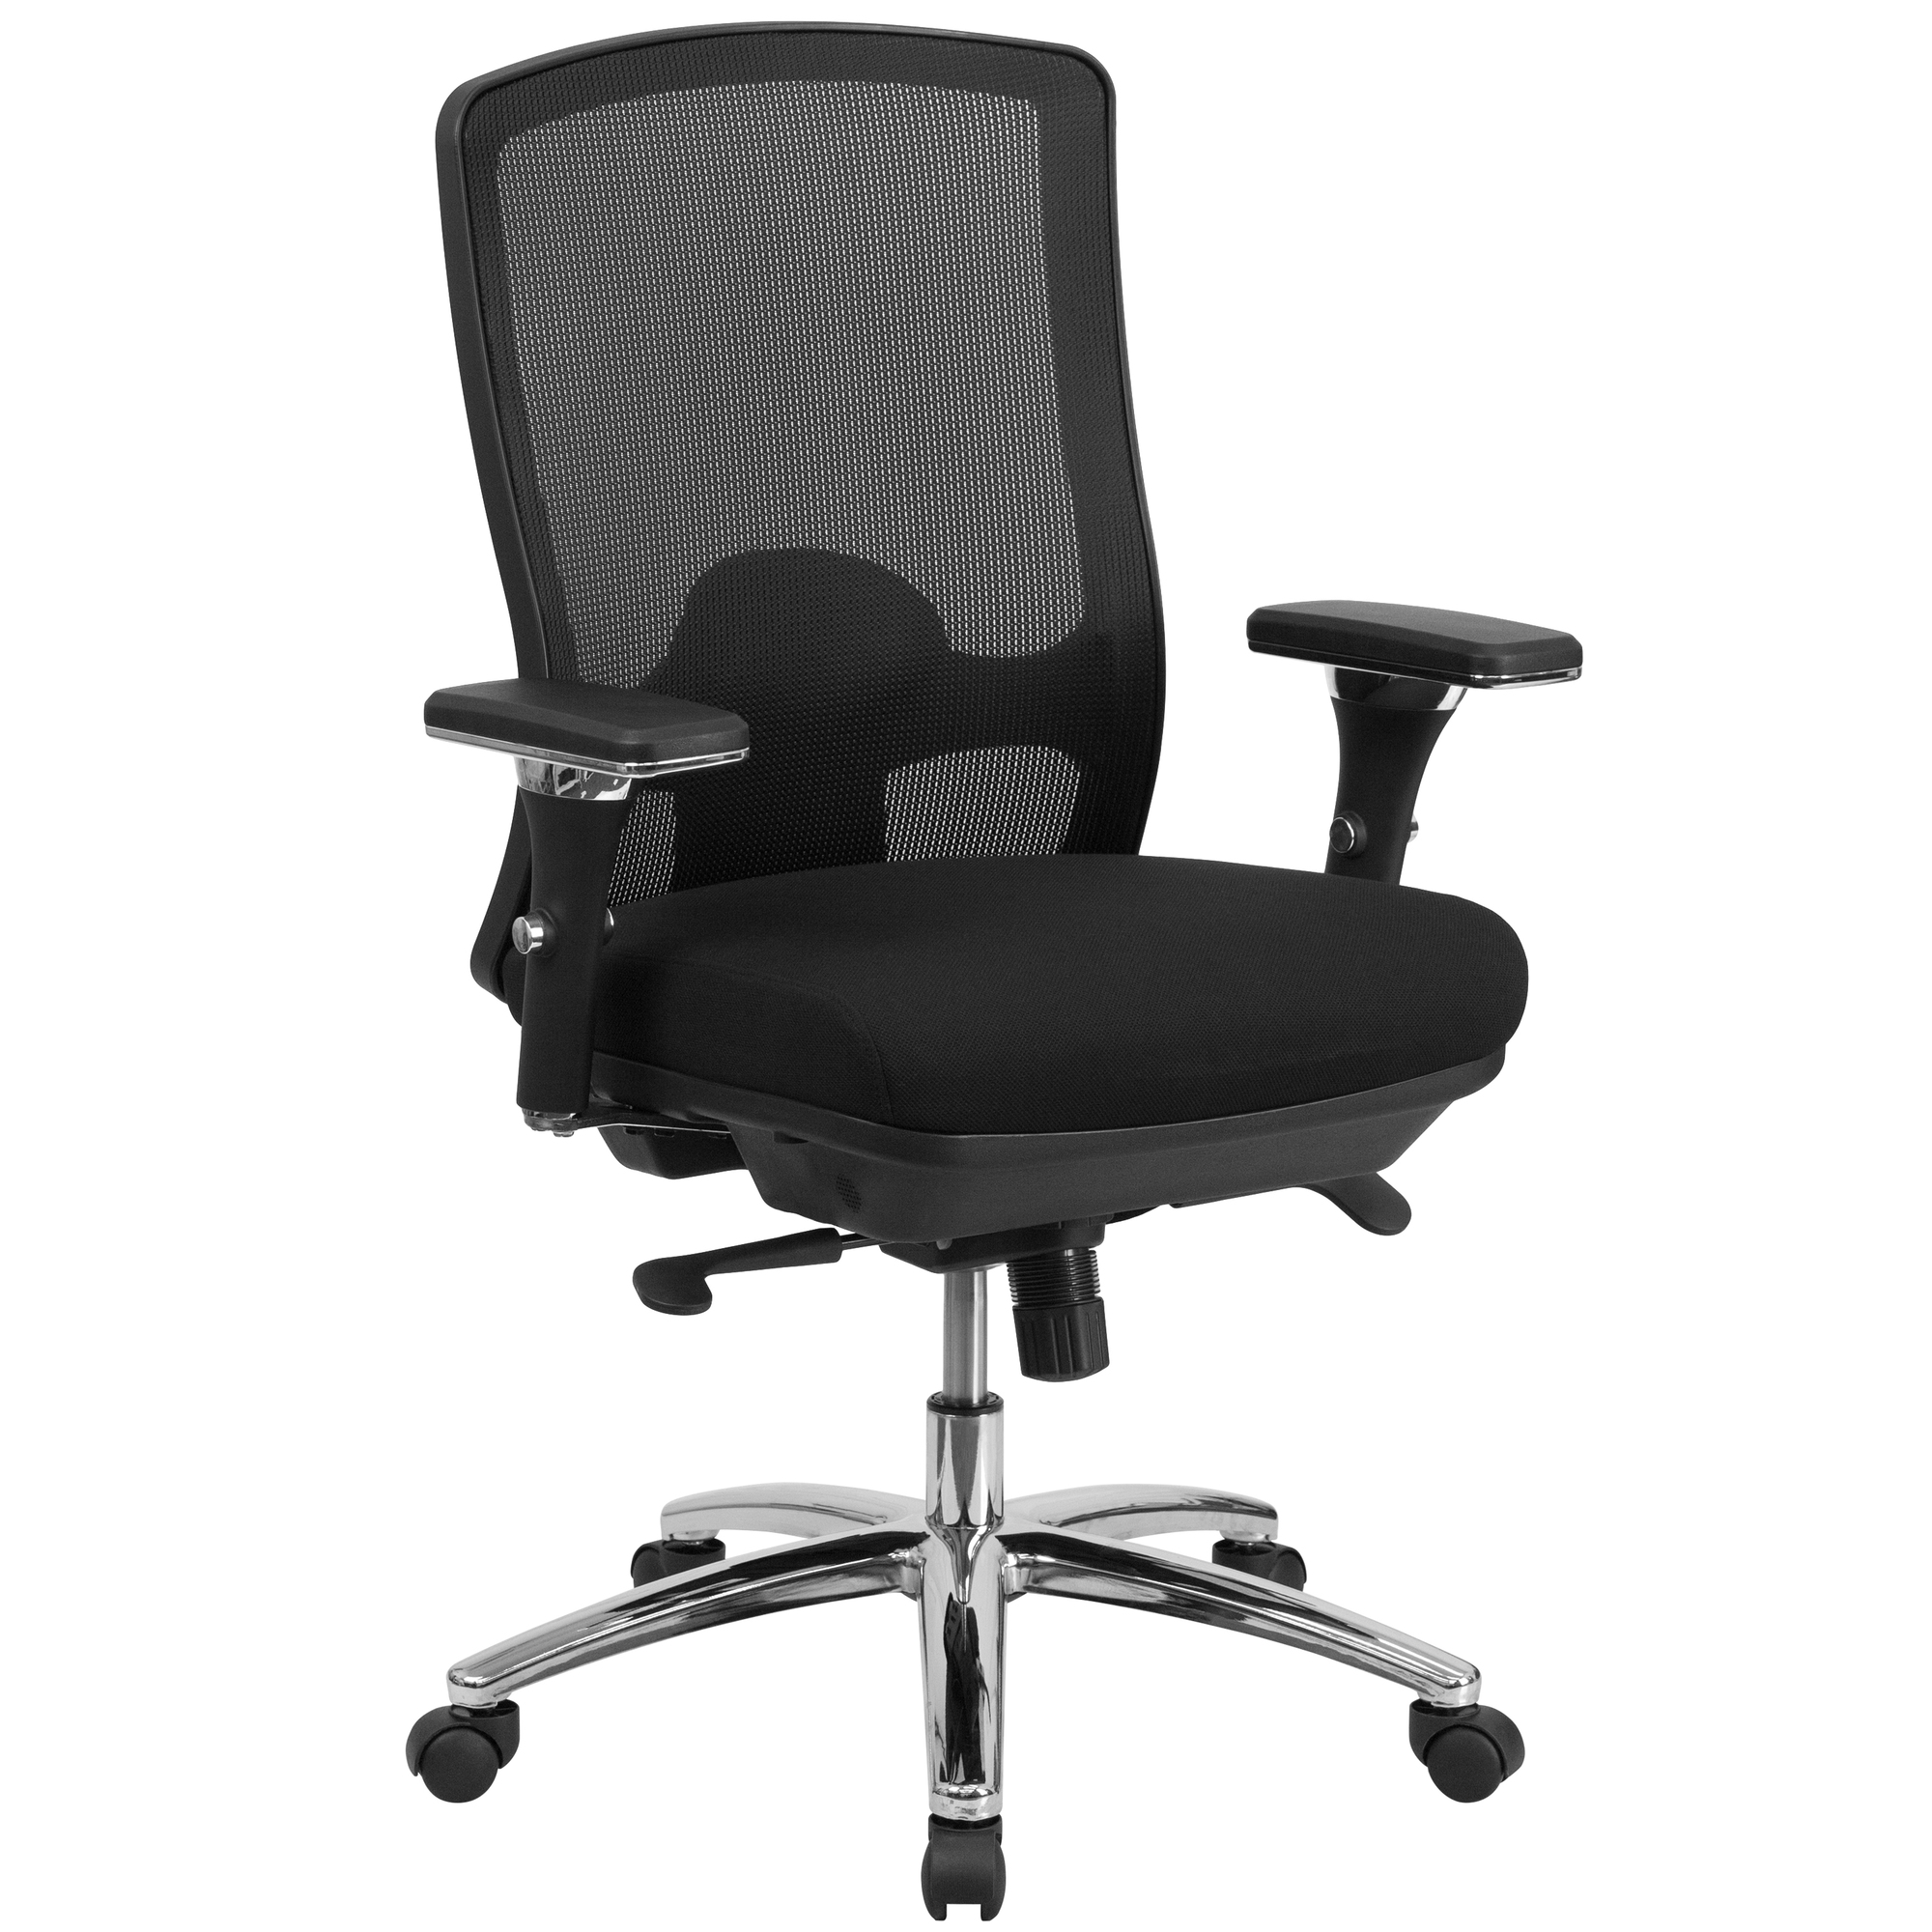 Flash Furniture, 24/7 350 lb. Rated Black Mesh Multifunction Chair, Primary Color Black, Included (qty.) 1, Model LQ2BK